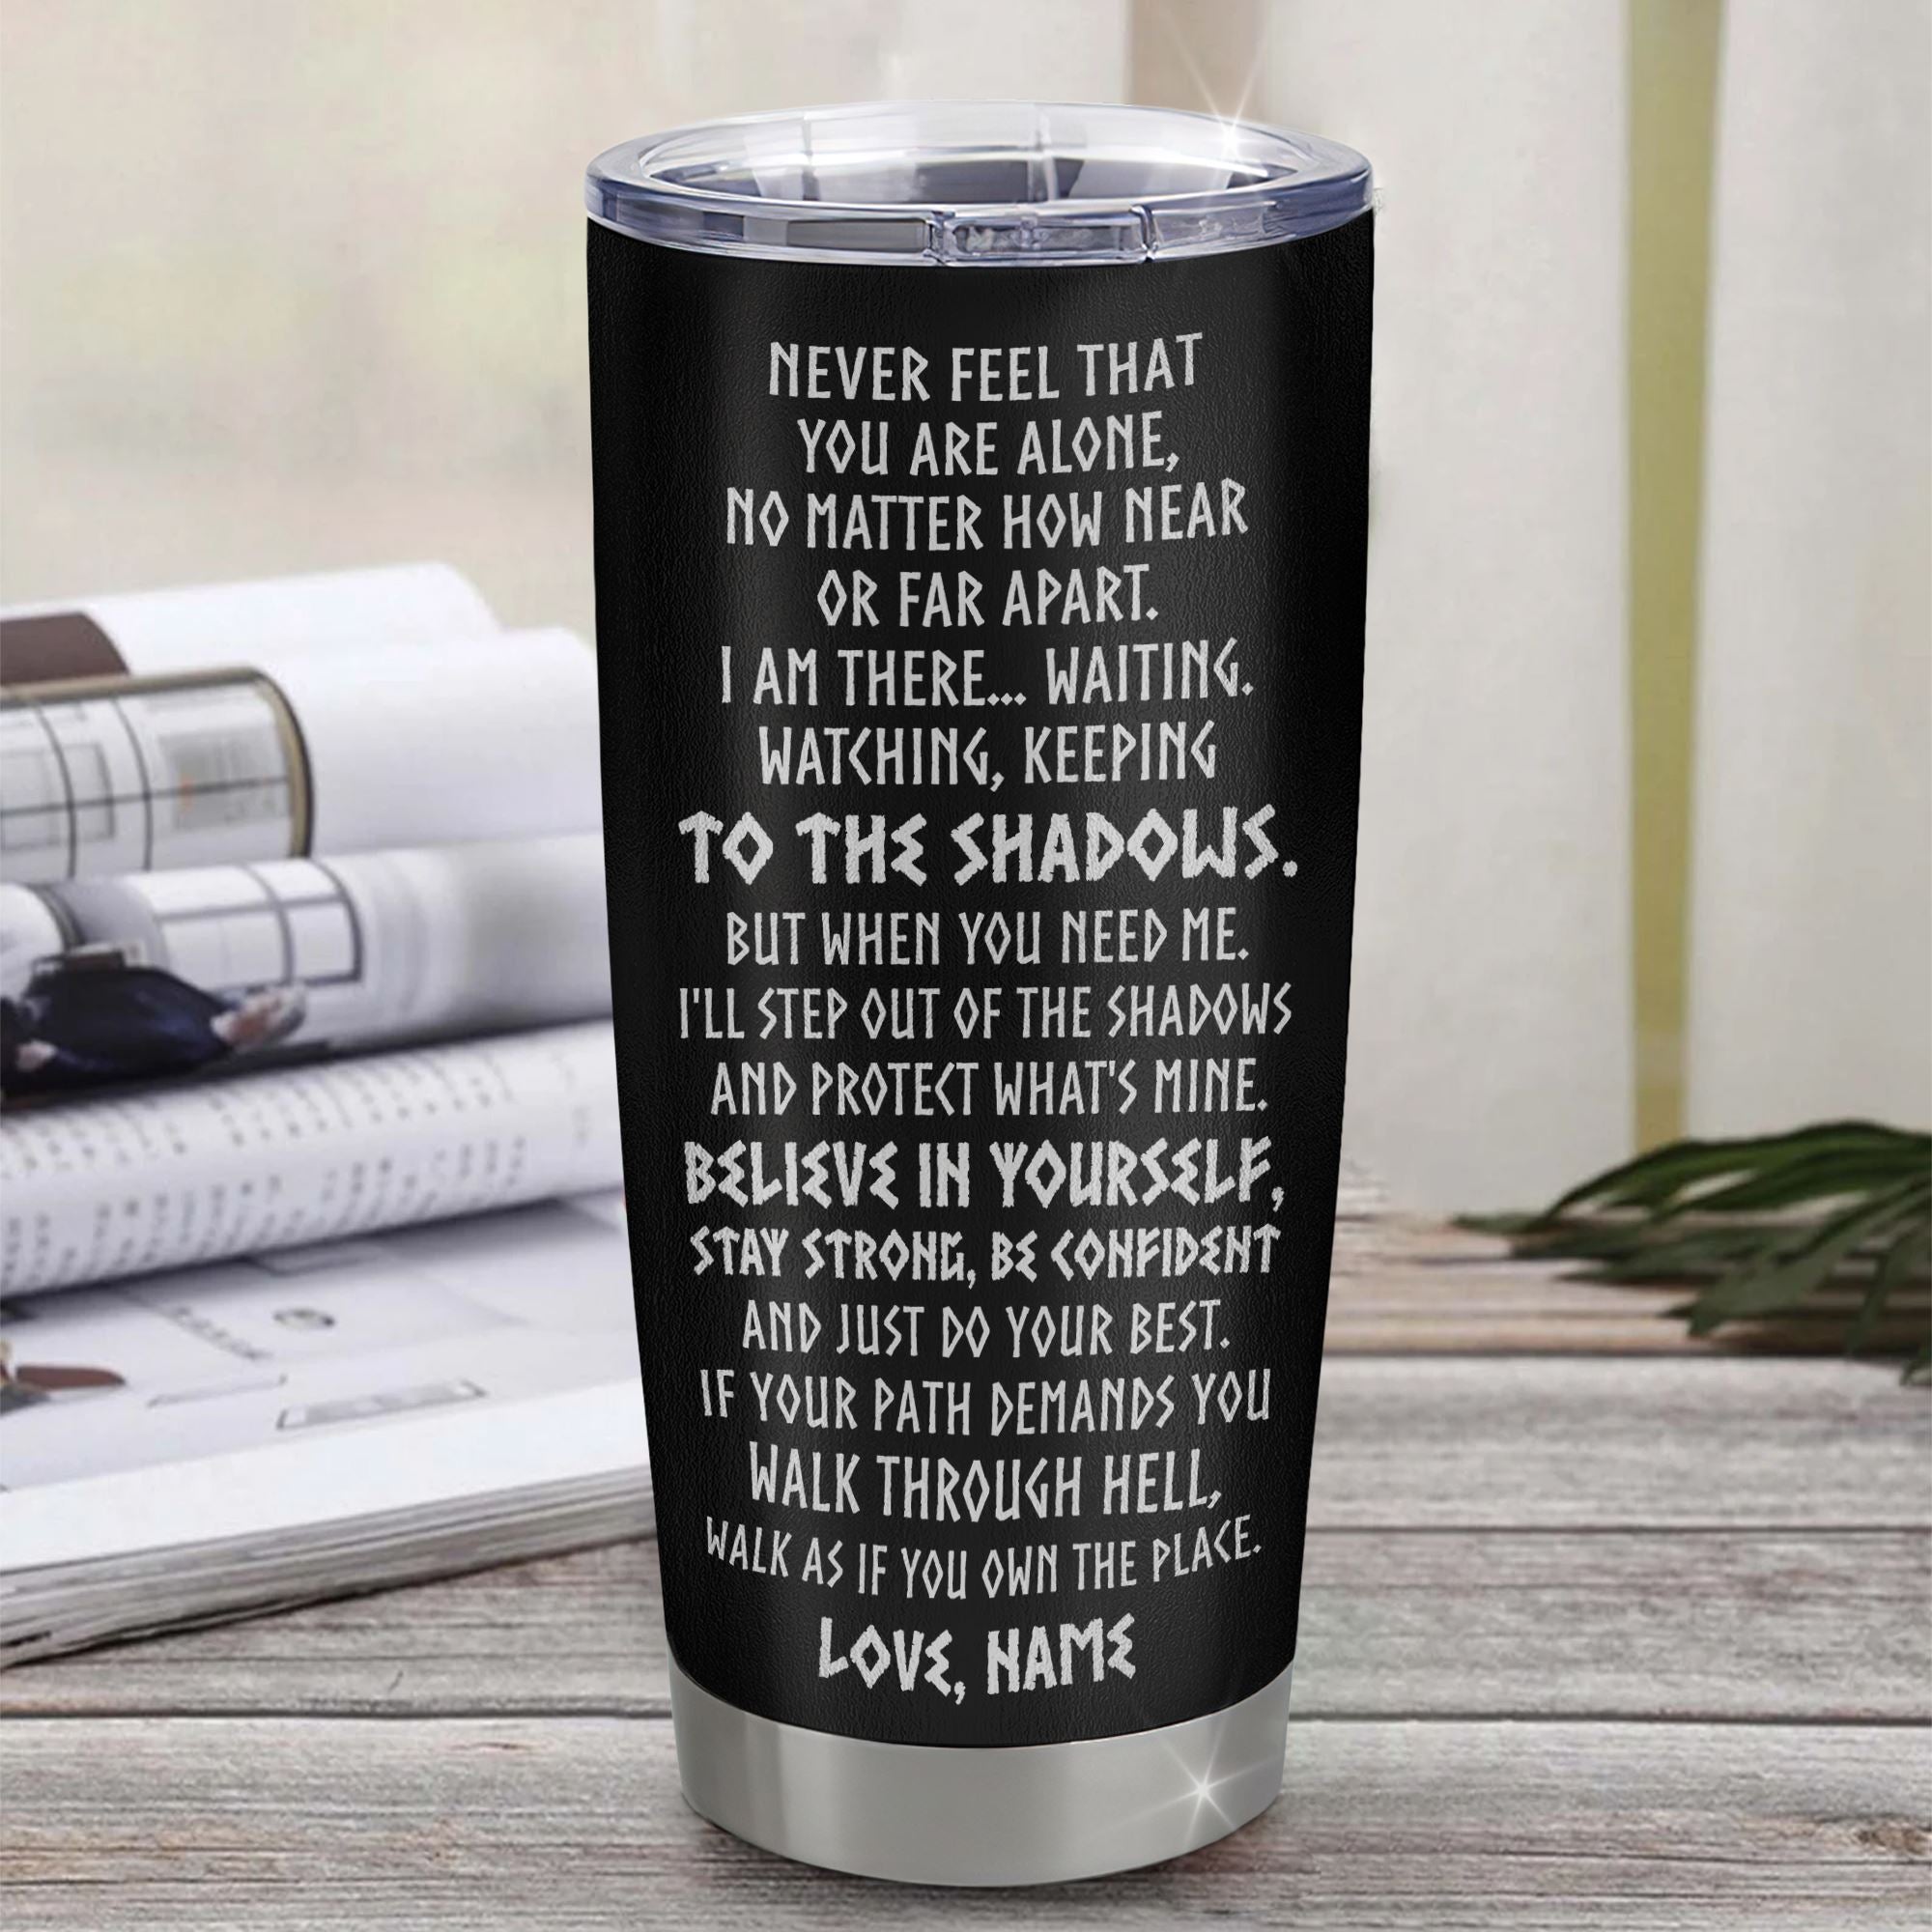 Personalized_To_My_Son_Tumbler_Viking_Stainless_Steel_Cup_Never_Feel_You_Are_Alone_Scandinavian_Runes_Viking_Son_Birthday_Christmas_Travel_Mug_Tumbler_mockup_1.jpg